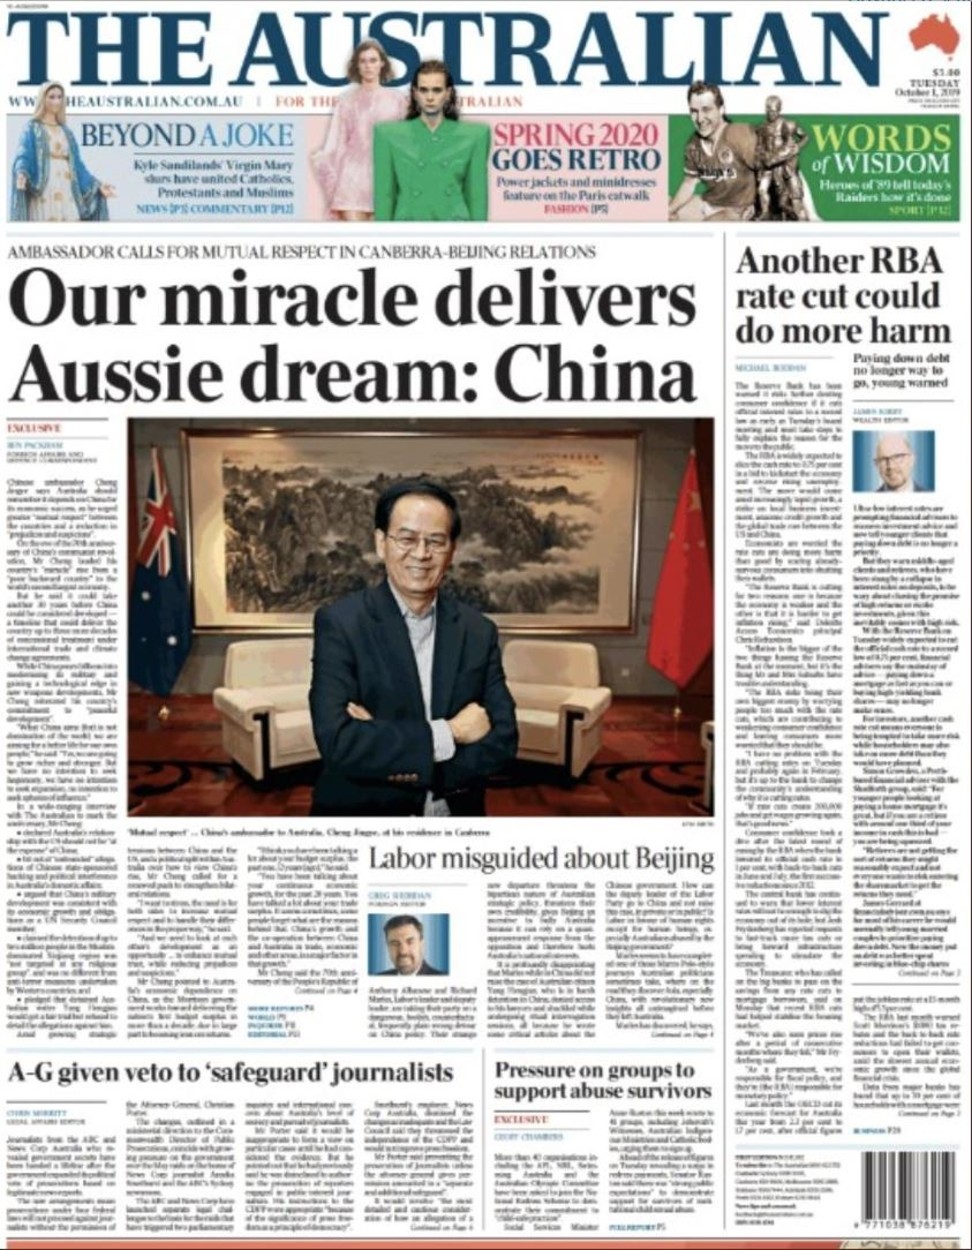 The front page of The Australian. Photo: Twitter